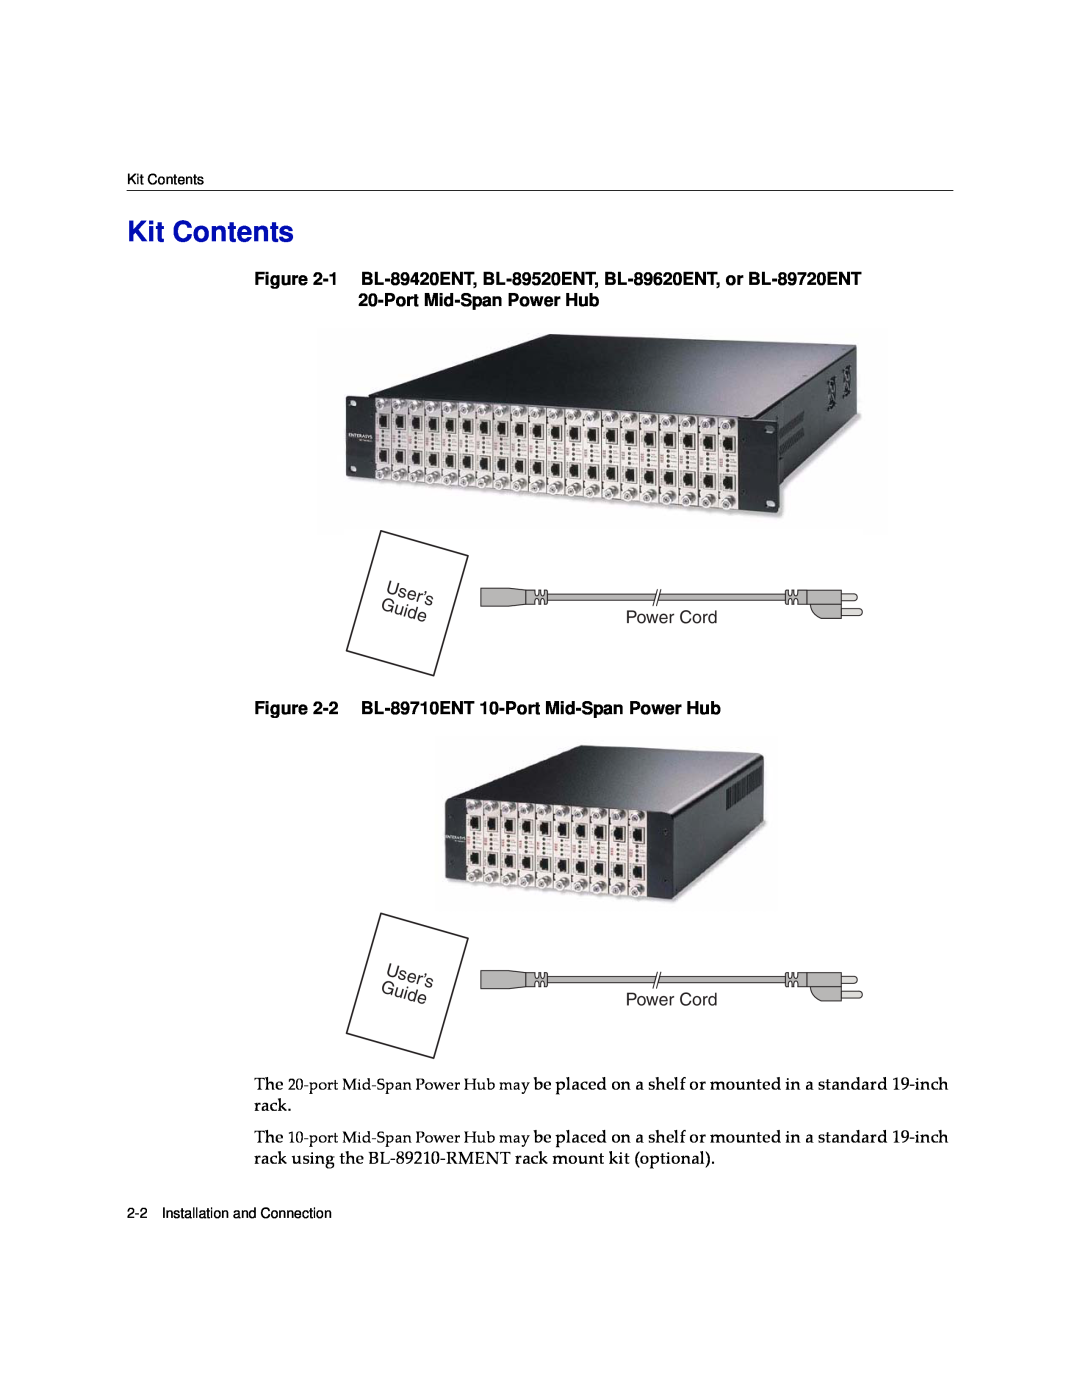 Enterasys Networks BL-89520ENT manual Kit Contents, 2 BL-89710ENT 10-Port Mid-Span Power Hub, User’s Guide, Power Cord 